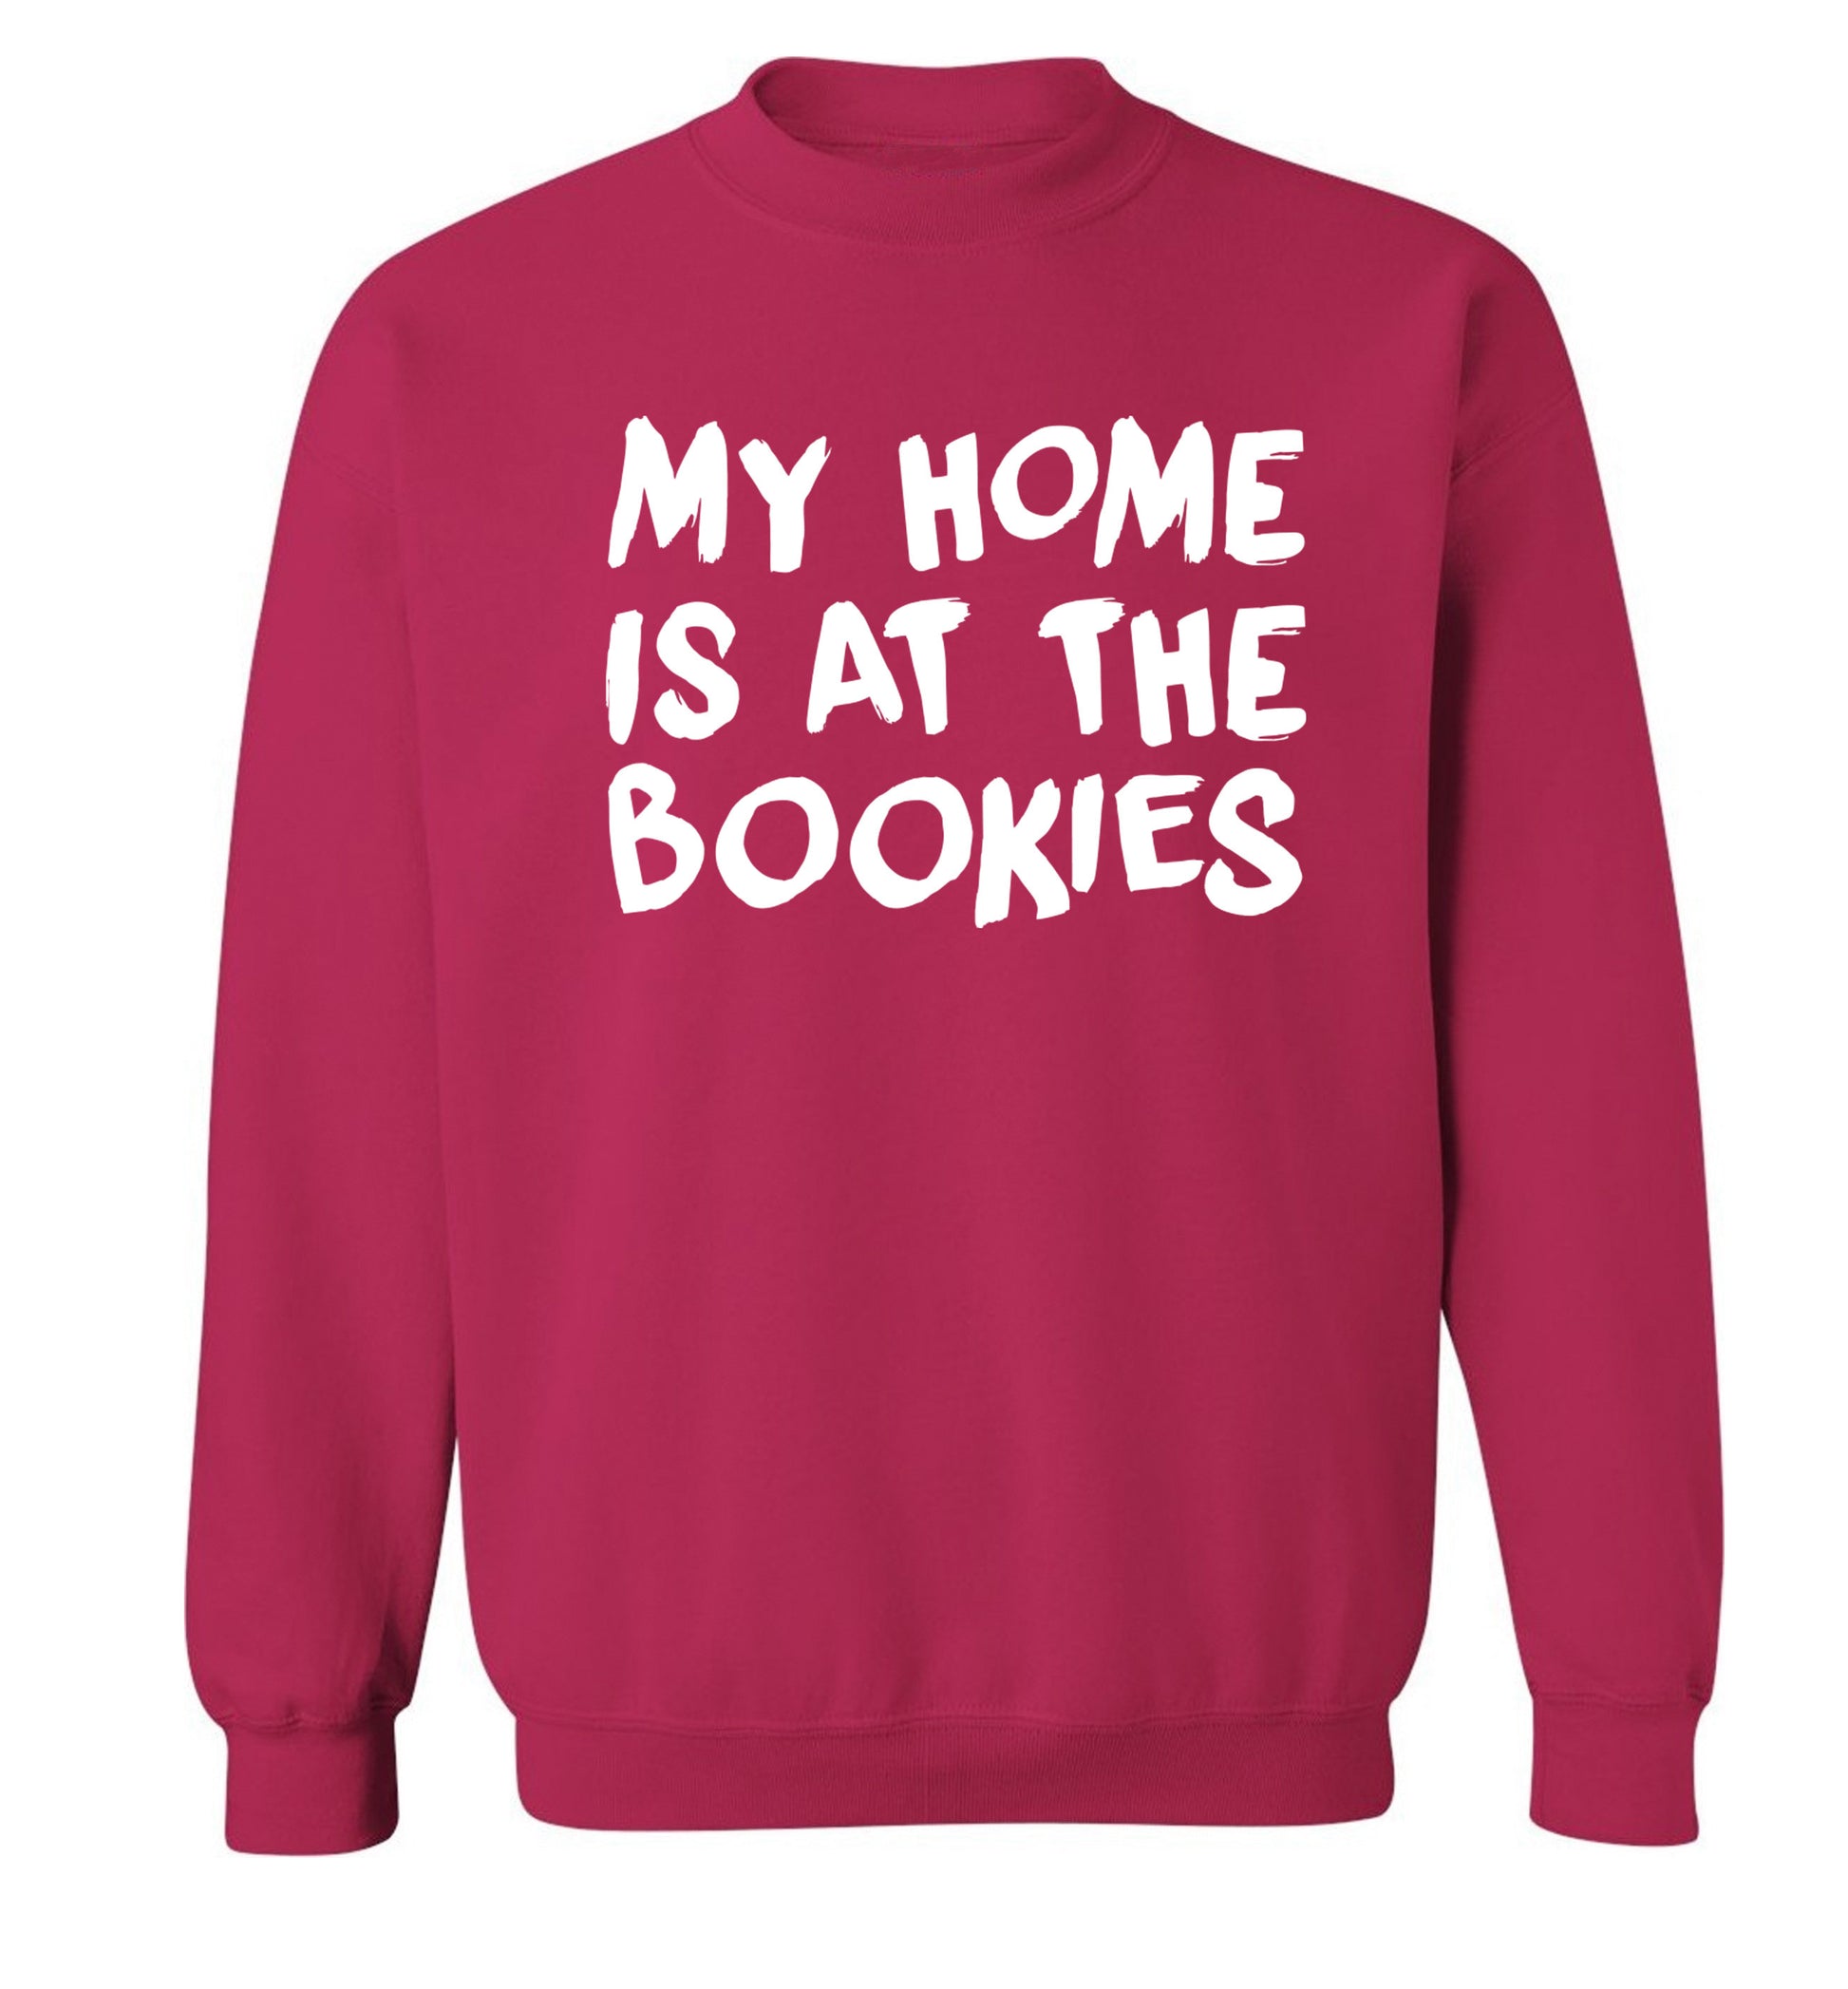 My home is at the bookies Adult's unisex pink Sweater 2XL